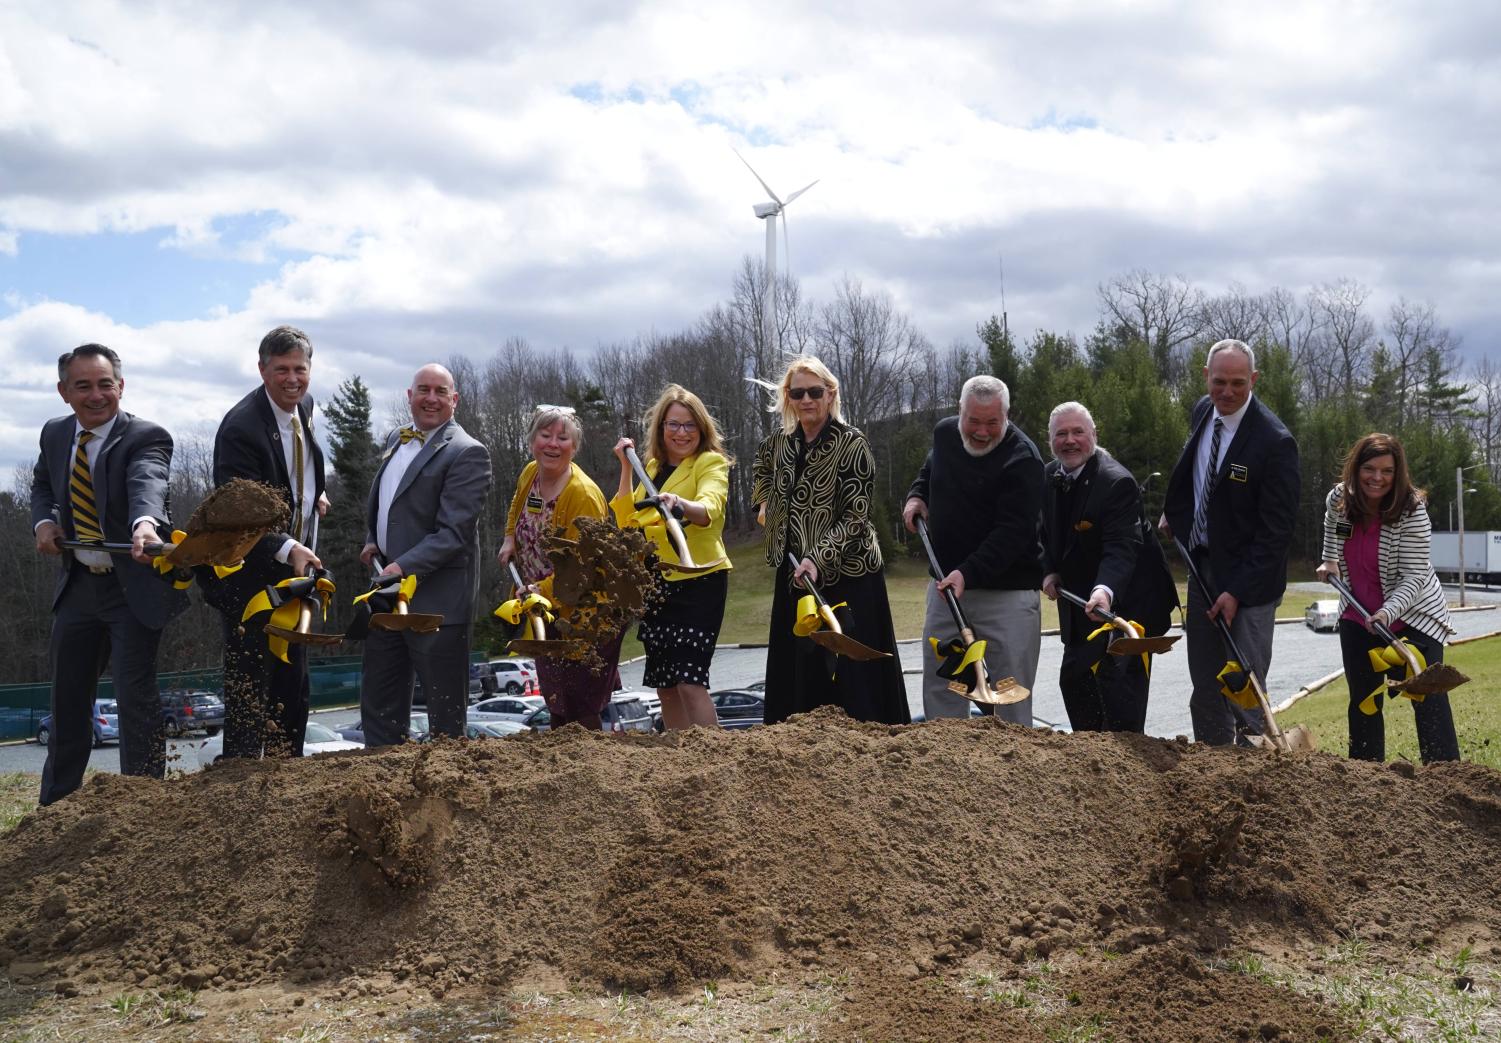 Groundbreaking event marks beginning of Innovation District